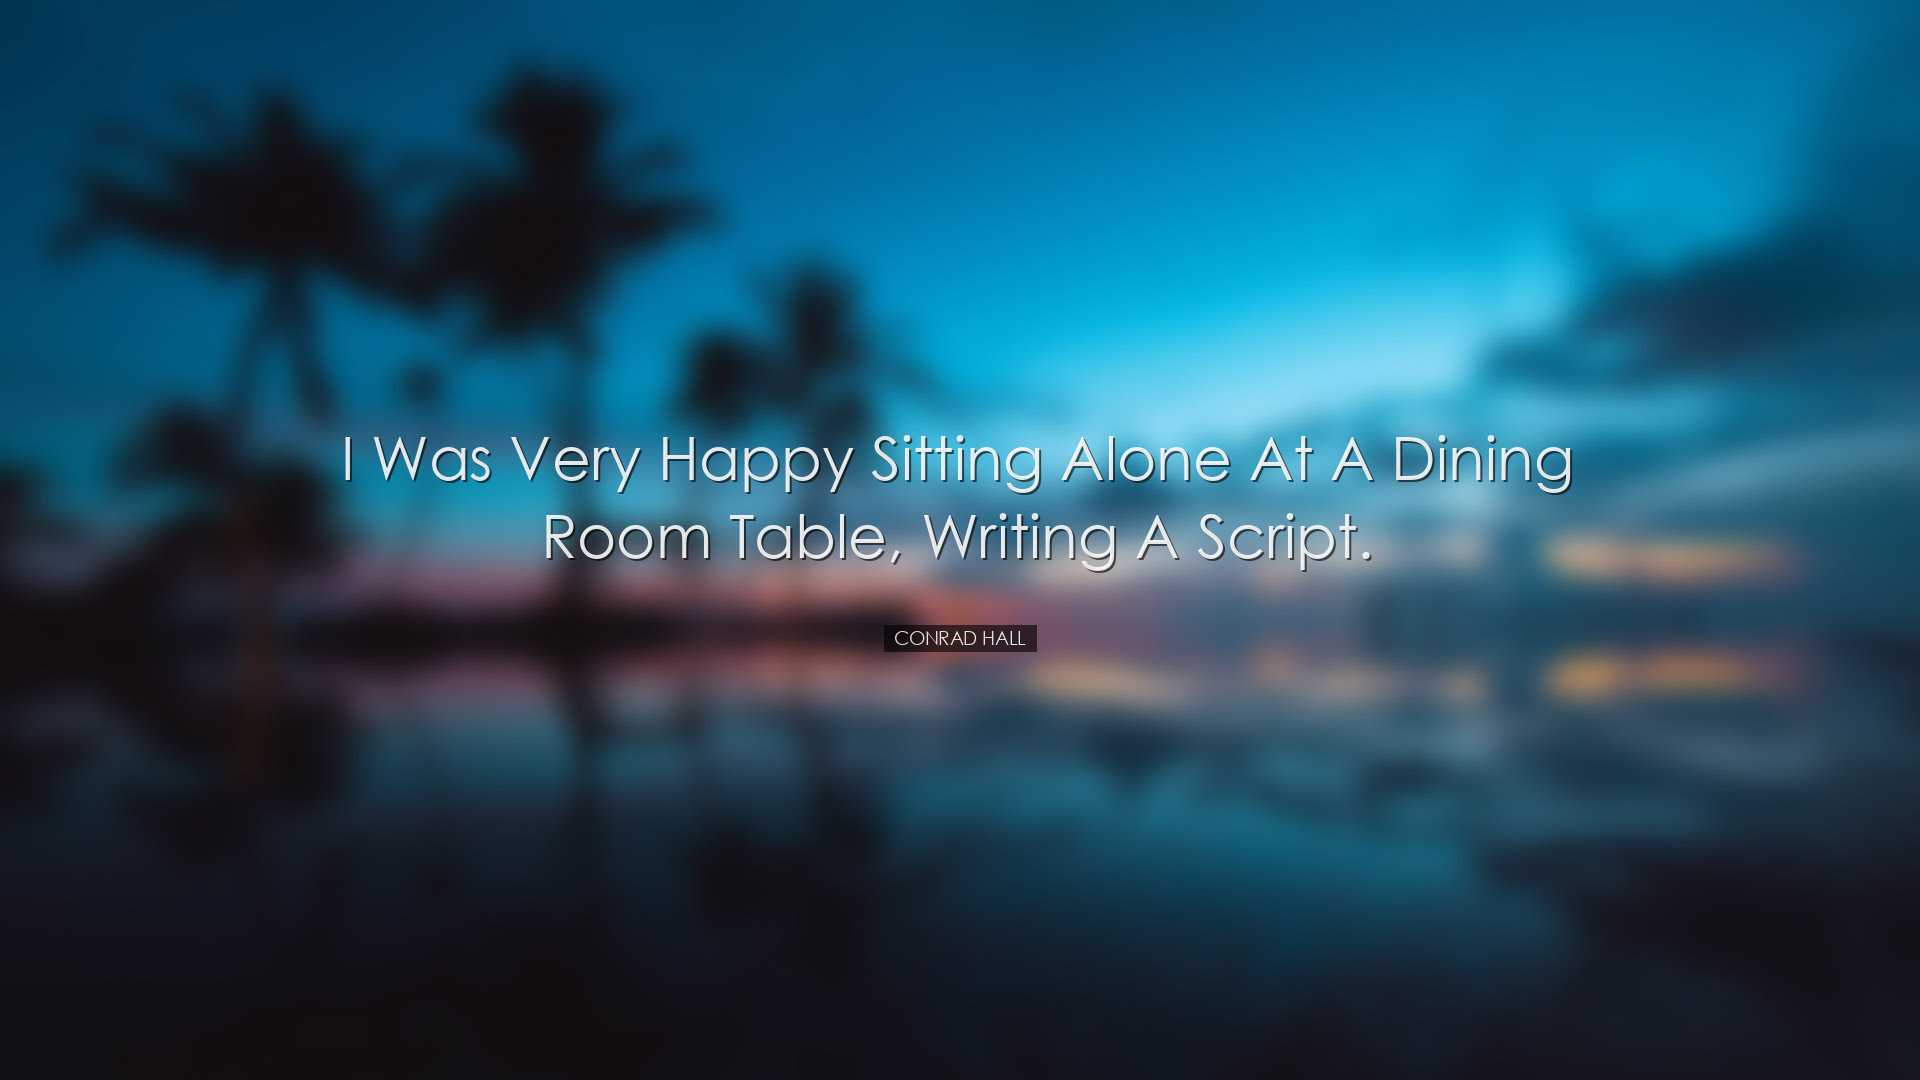 I was very happy sitting alone at a dining room table, writing a s